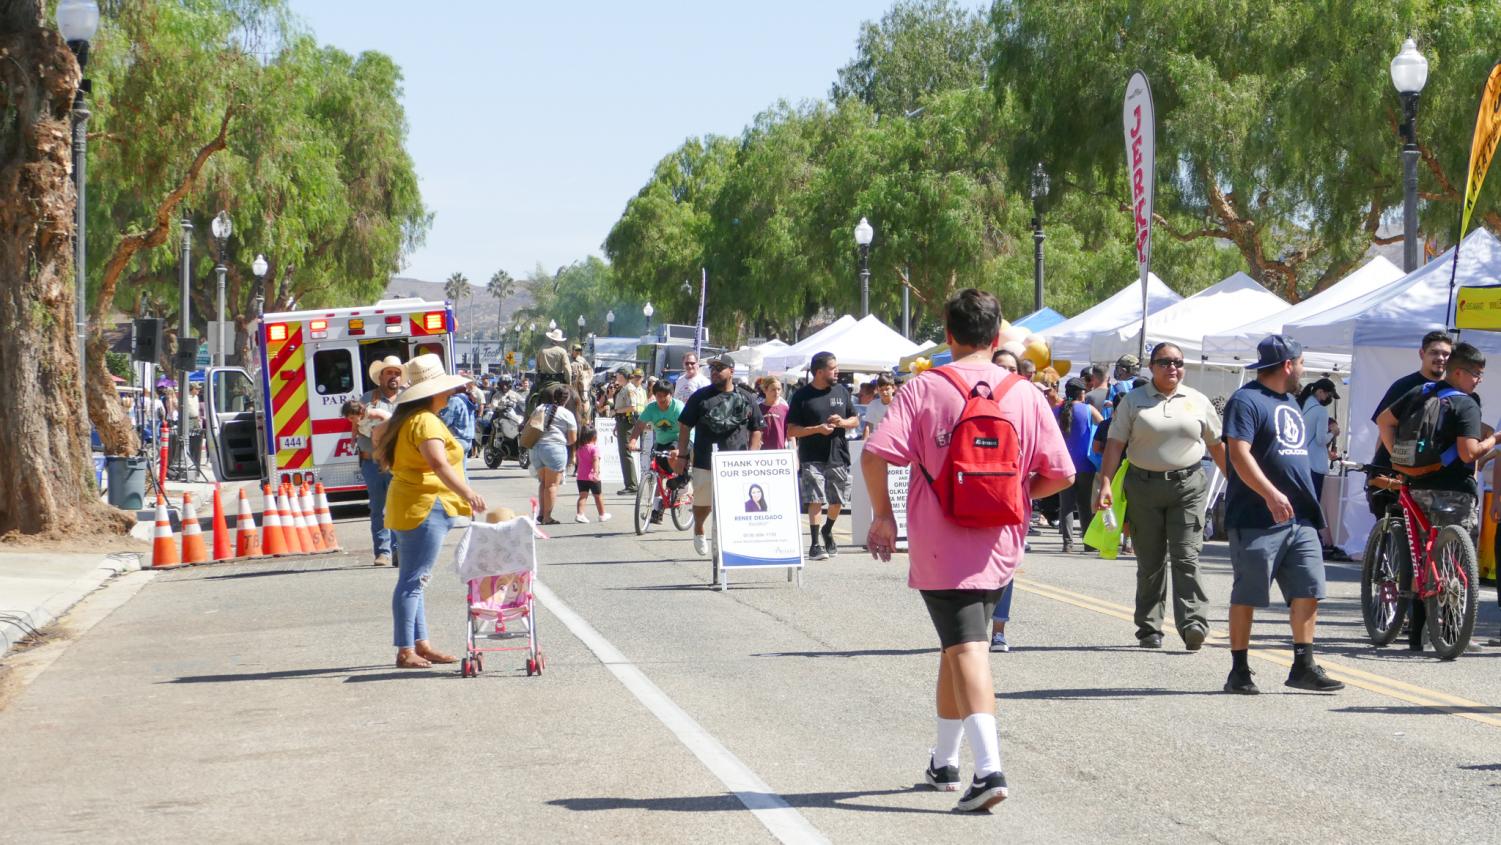 The city of Moorpark celebrates 50th annual Country Day celebration